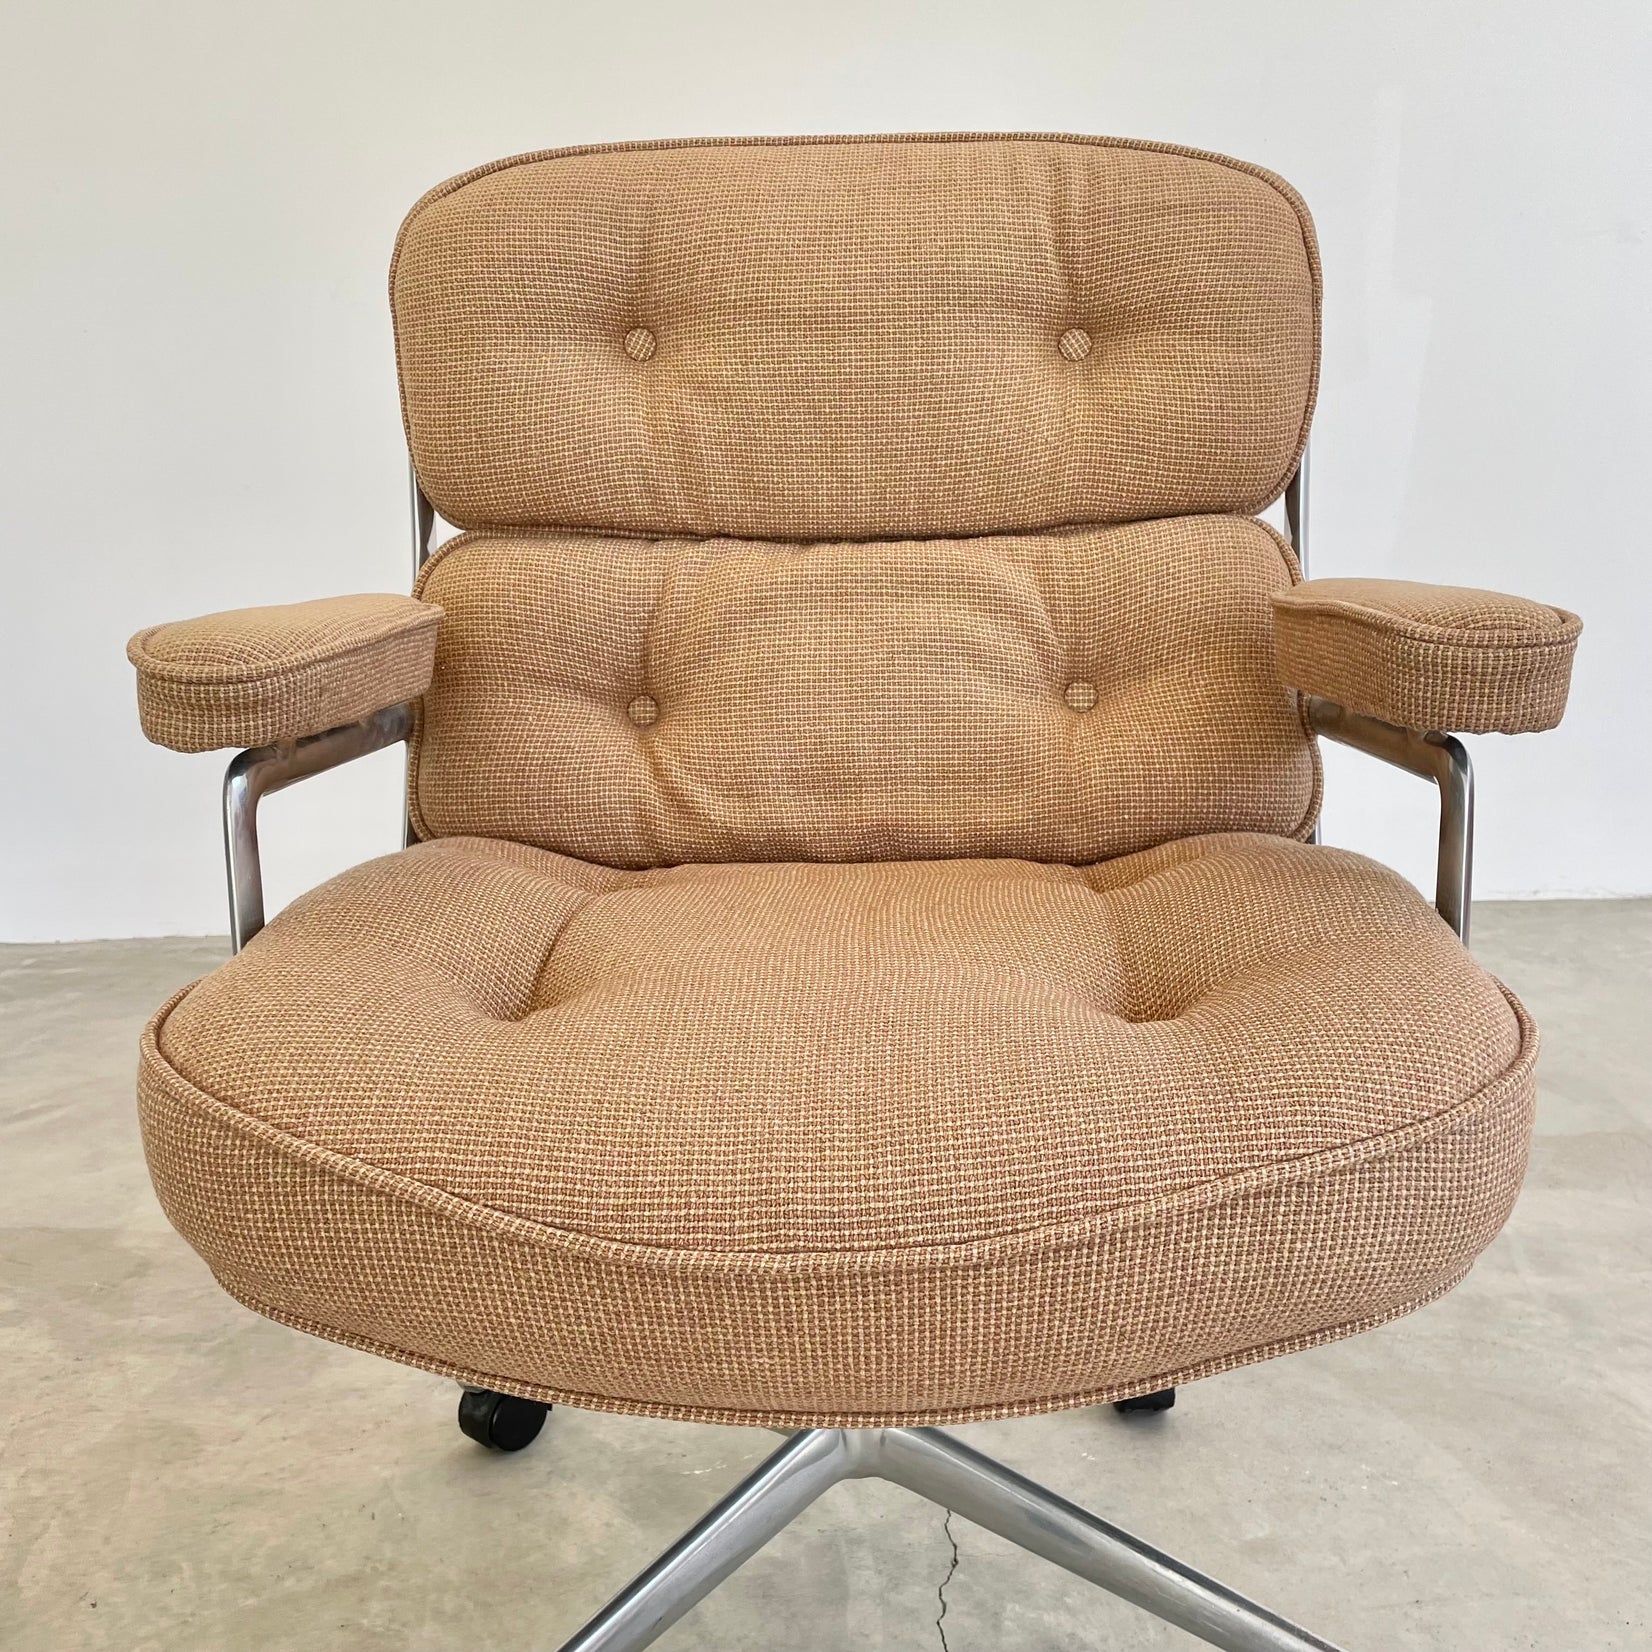 Eames Time Life Chair in Tan Burlap, 1984 USA